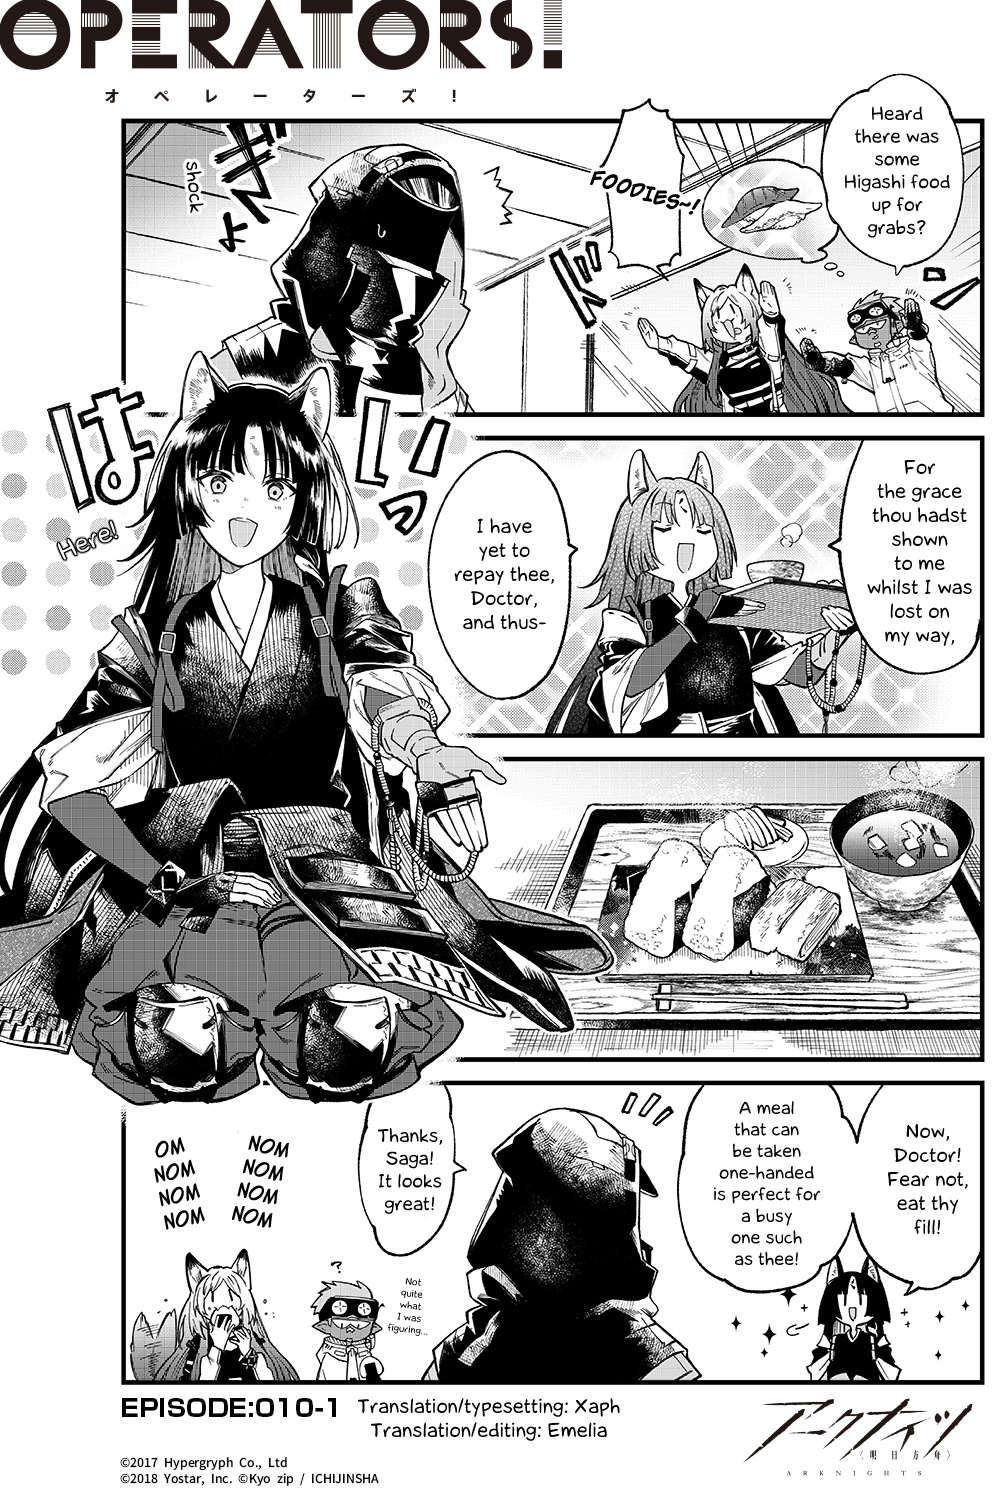 Arknights: Operators! Chapter 10.1 #1